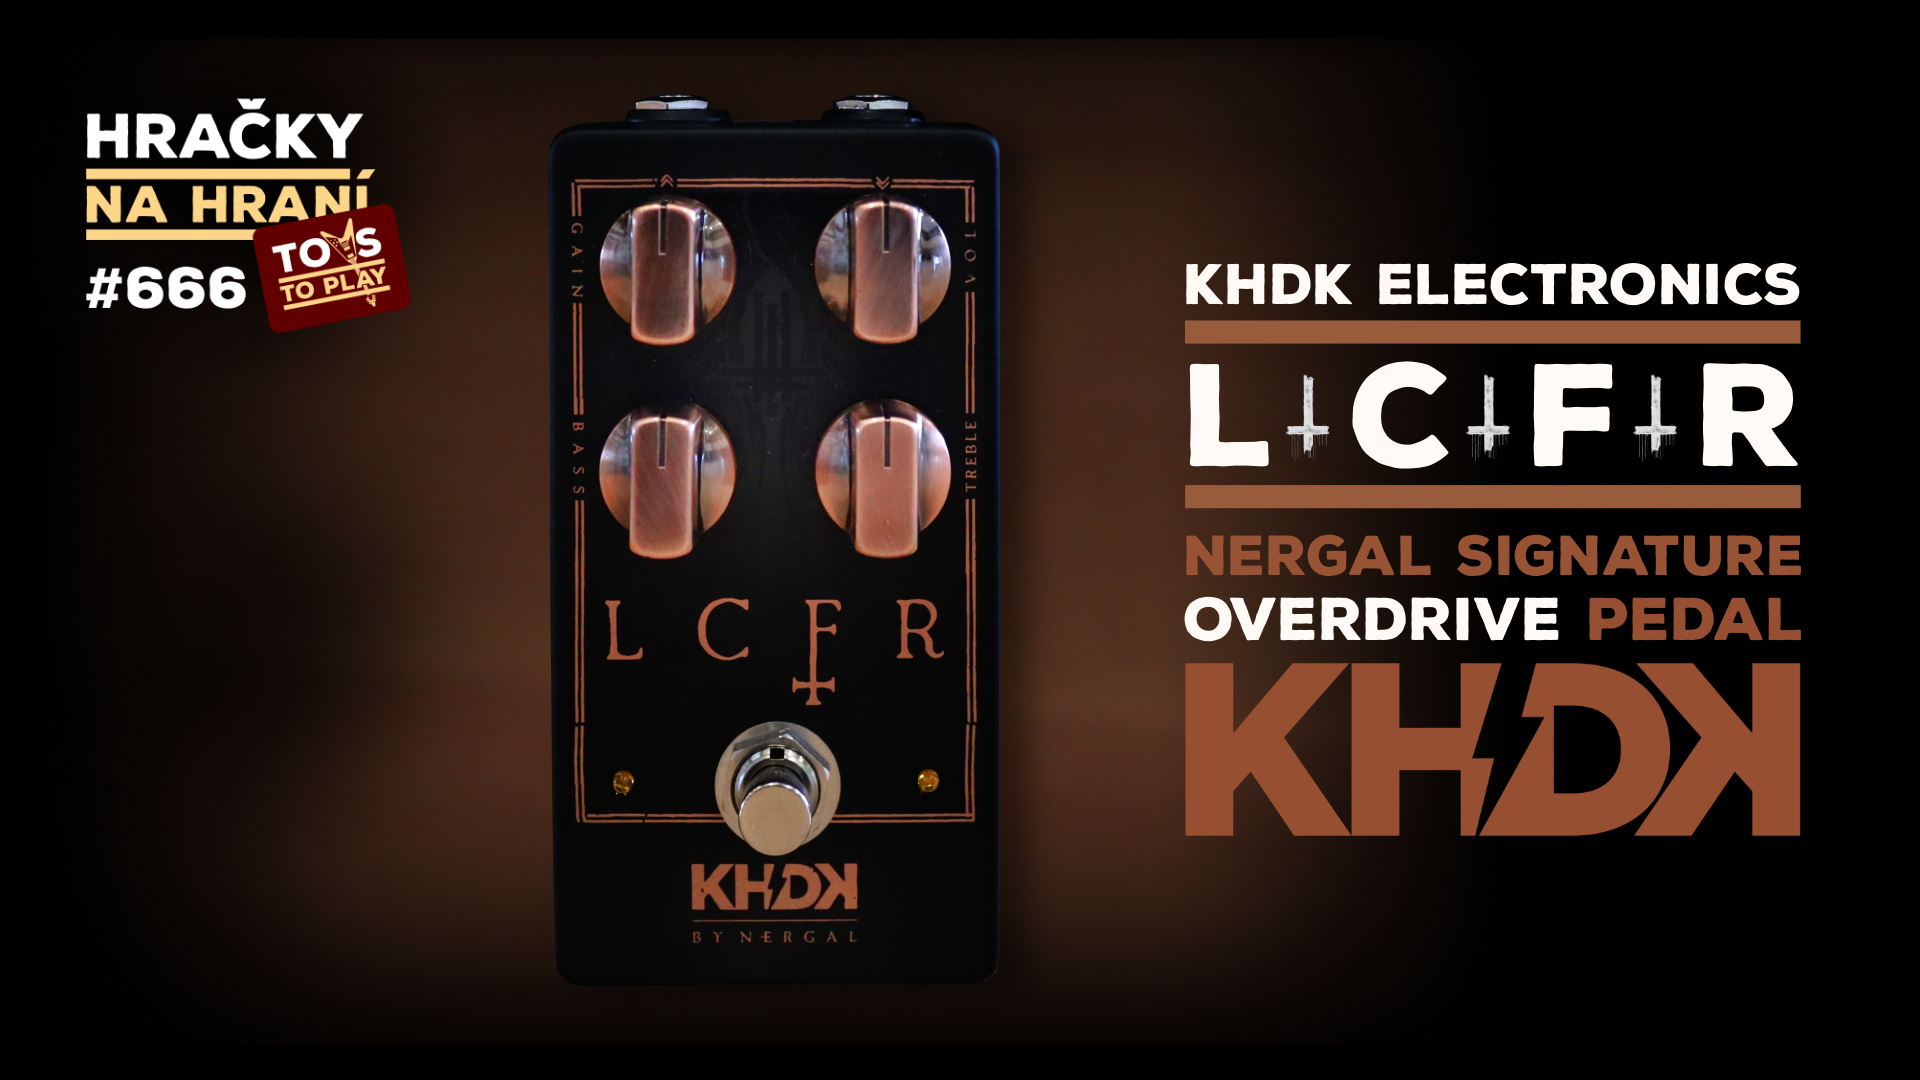 Toys to Play #666 - KHDK LCFR: Behemoth's Nergal Signature Overdrive